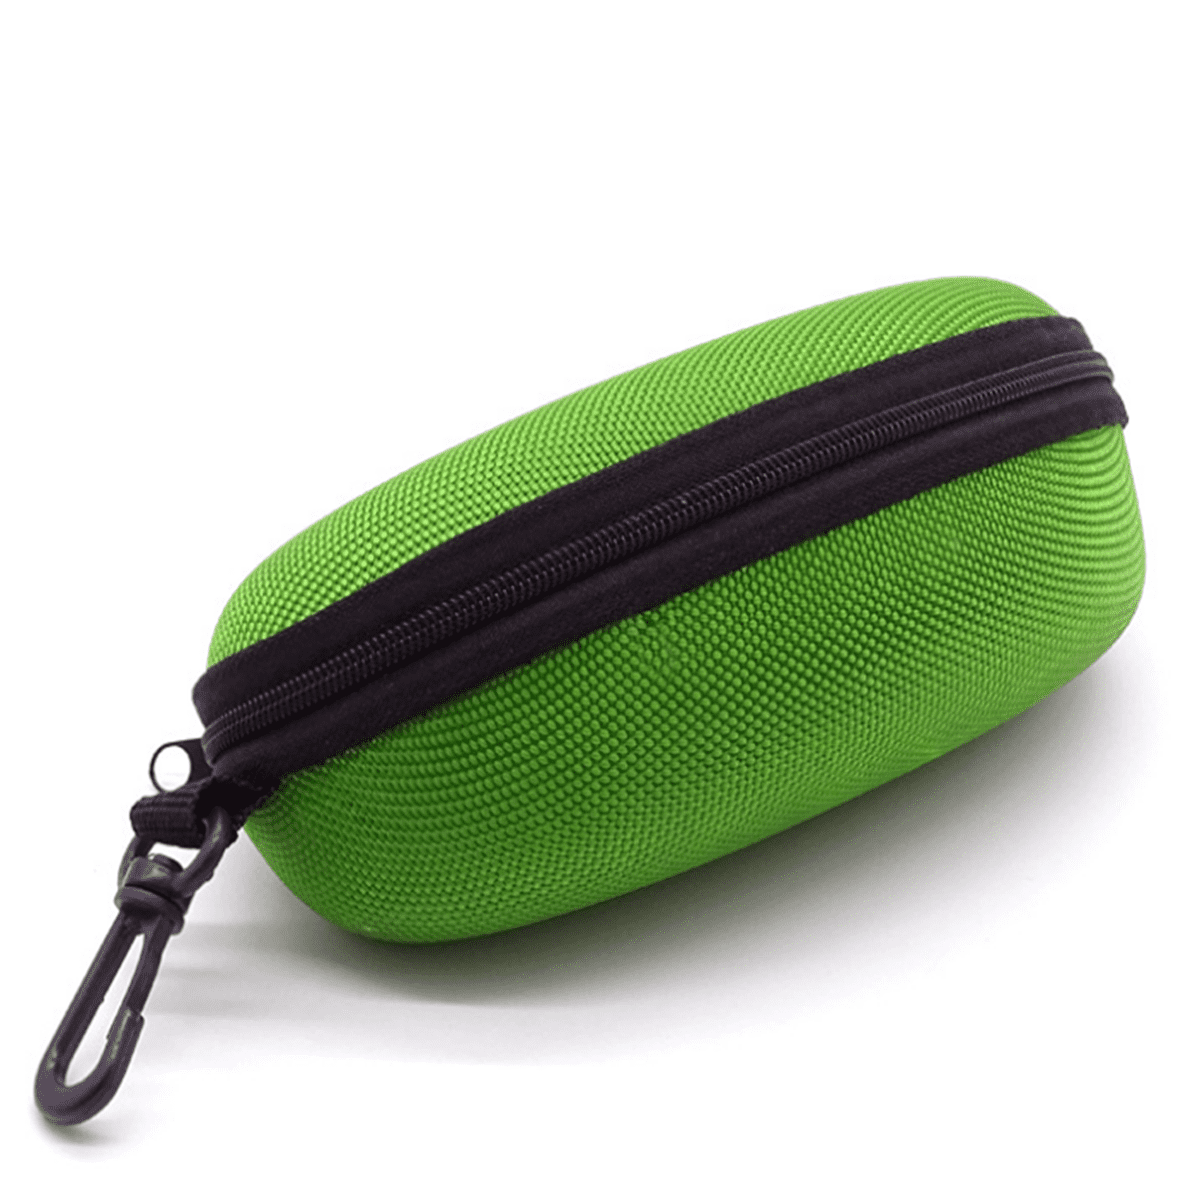 Accessories Sunglasses & Eyewear Glasses Cases Crocheted Double Glasses Case Grassy Green 